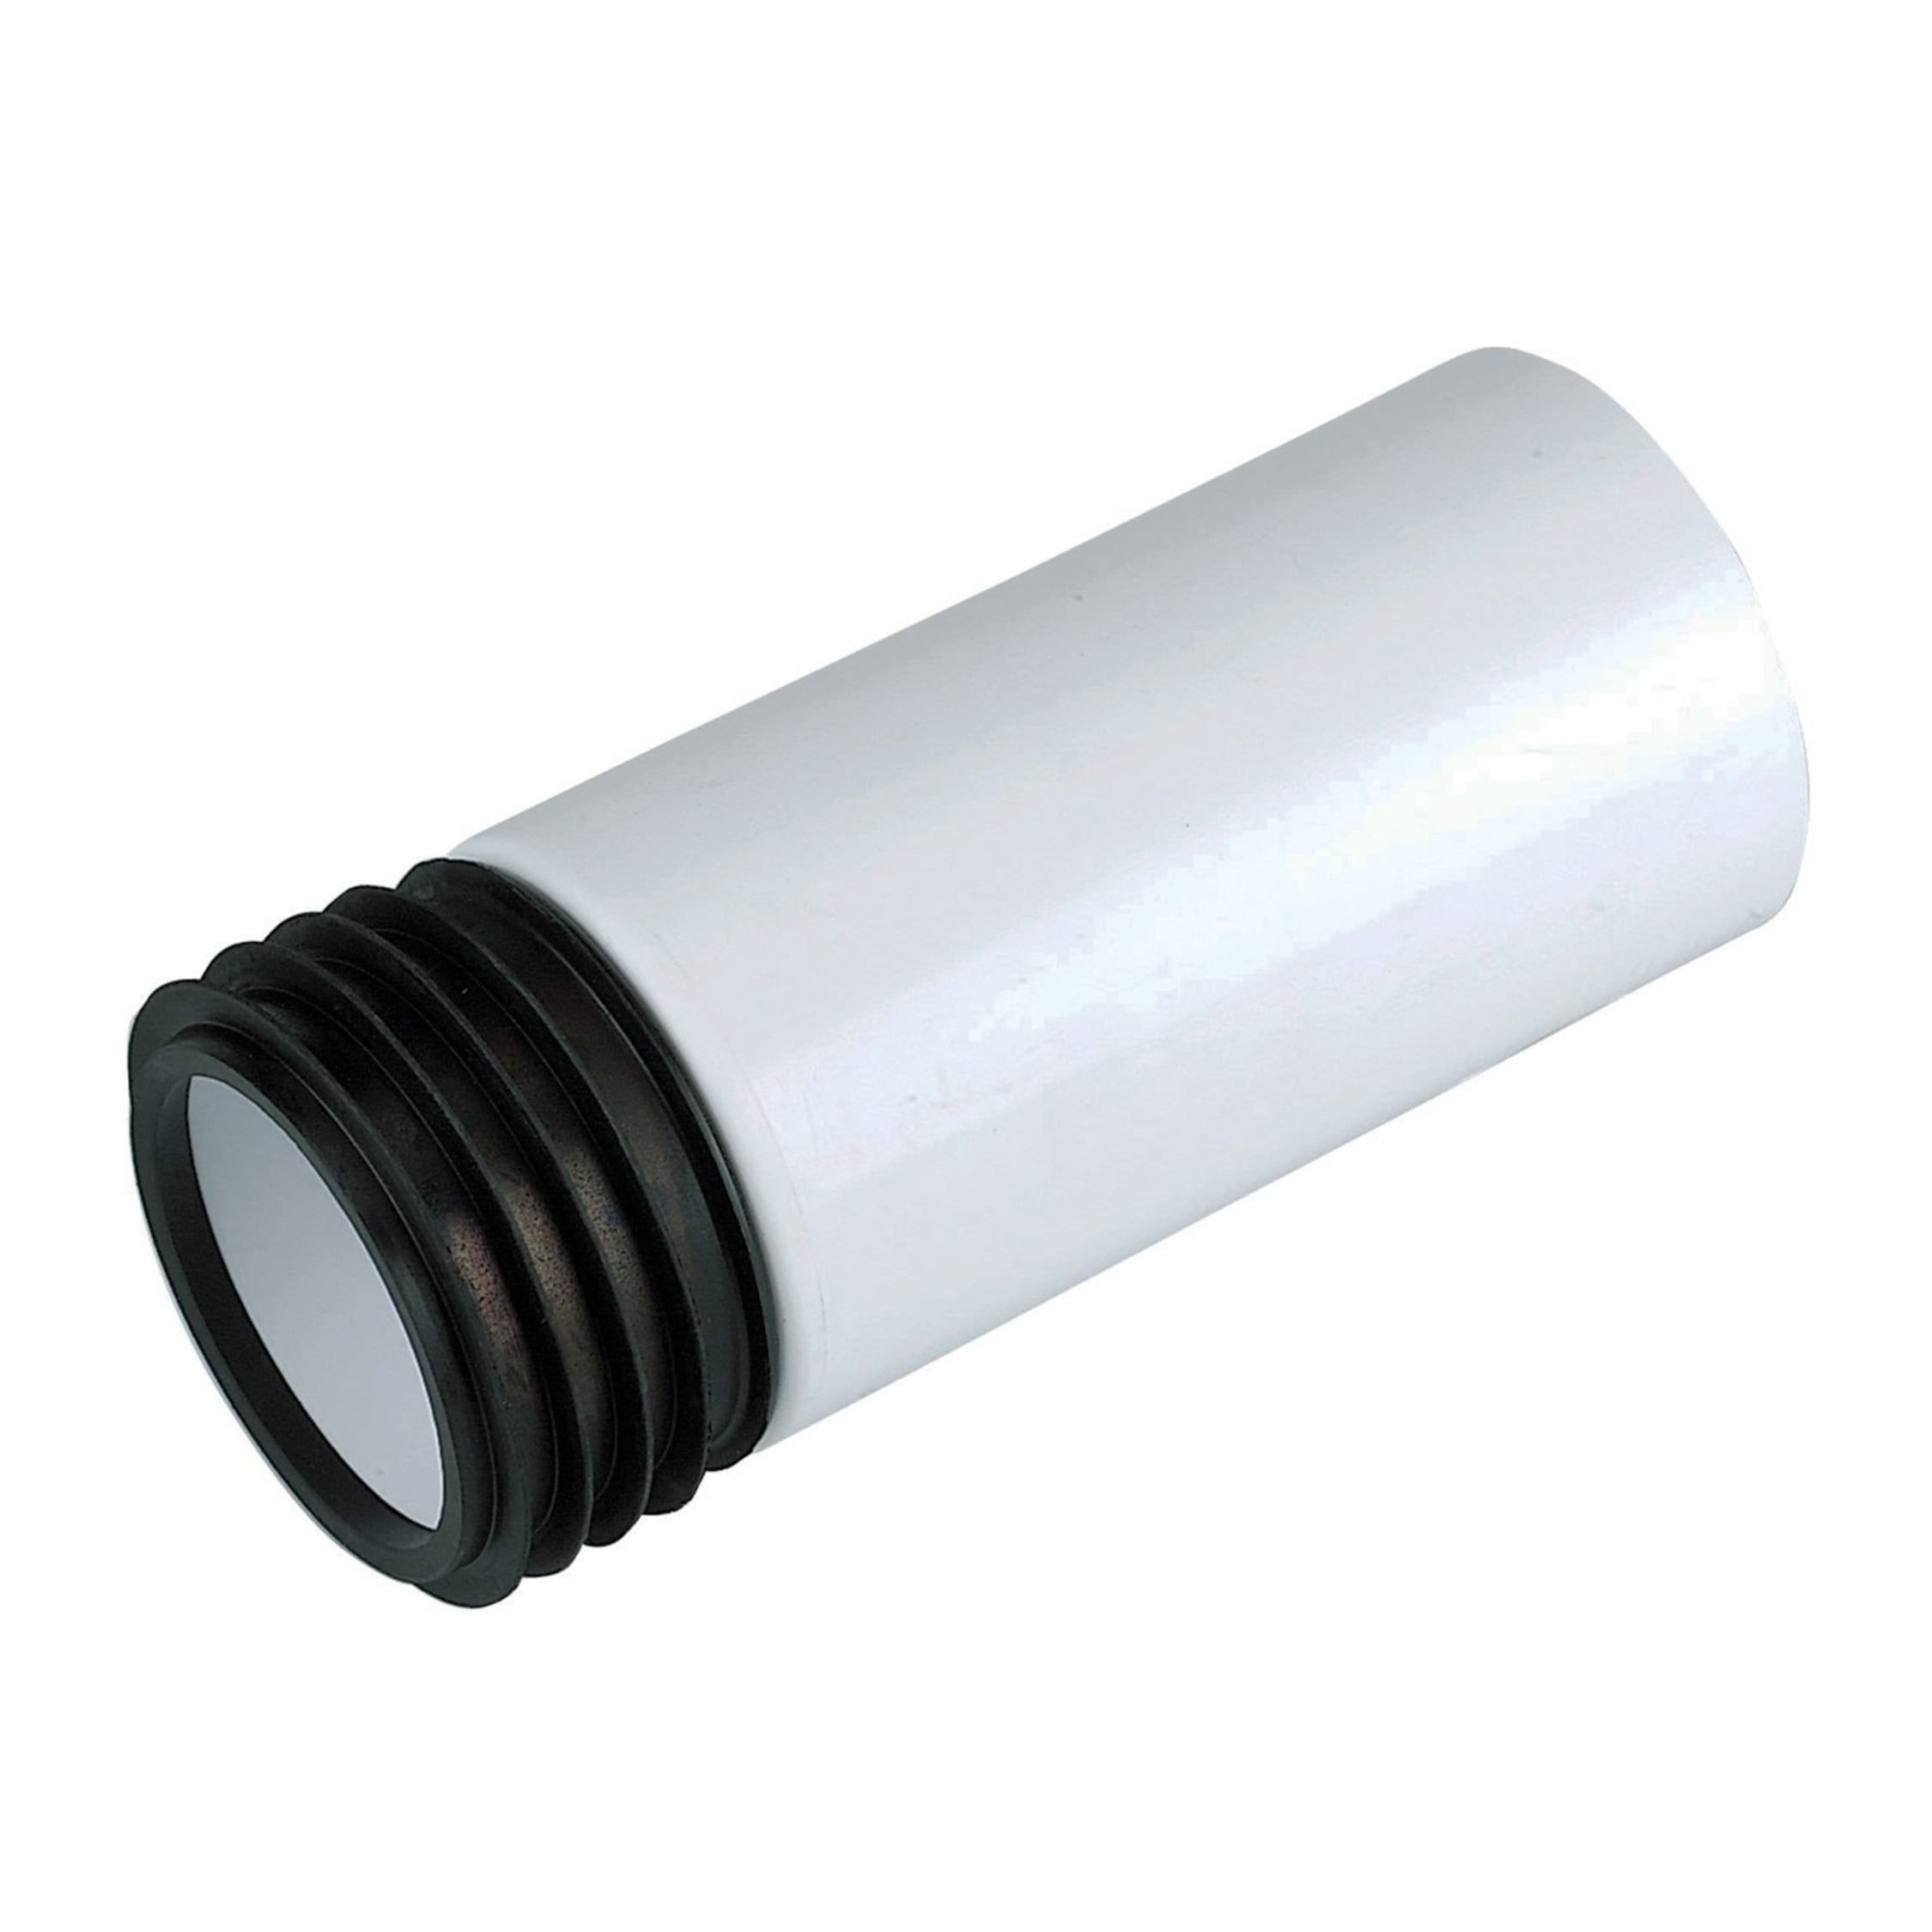 STRAIGHT RIGID EXTENSION for WC PAN CONNECTOR to 110mm 4"SOIL PIPE TOILET WASTE 